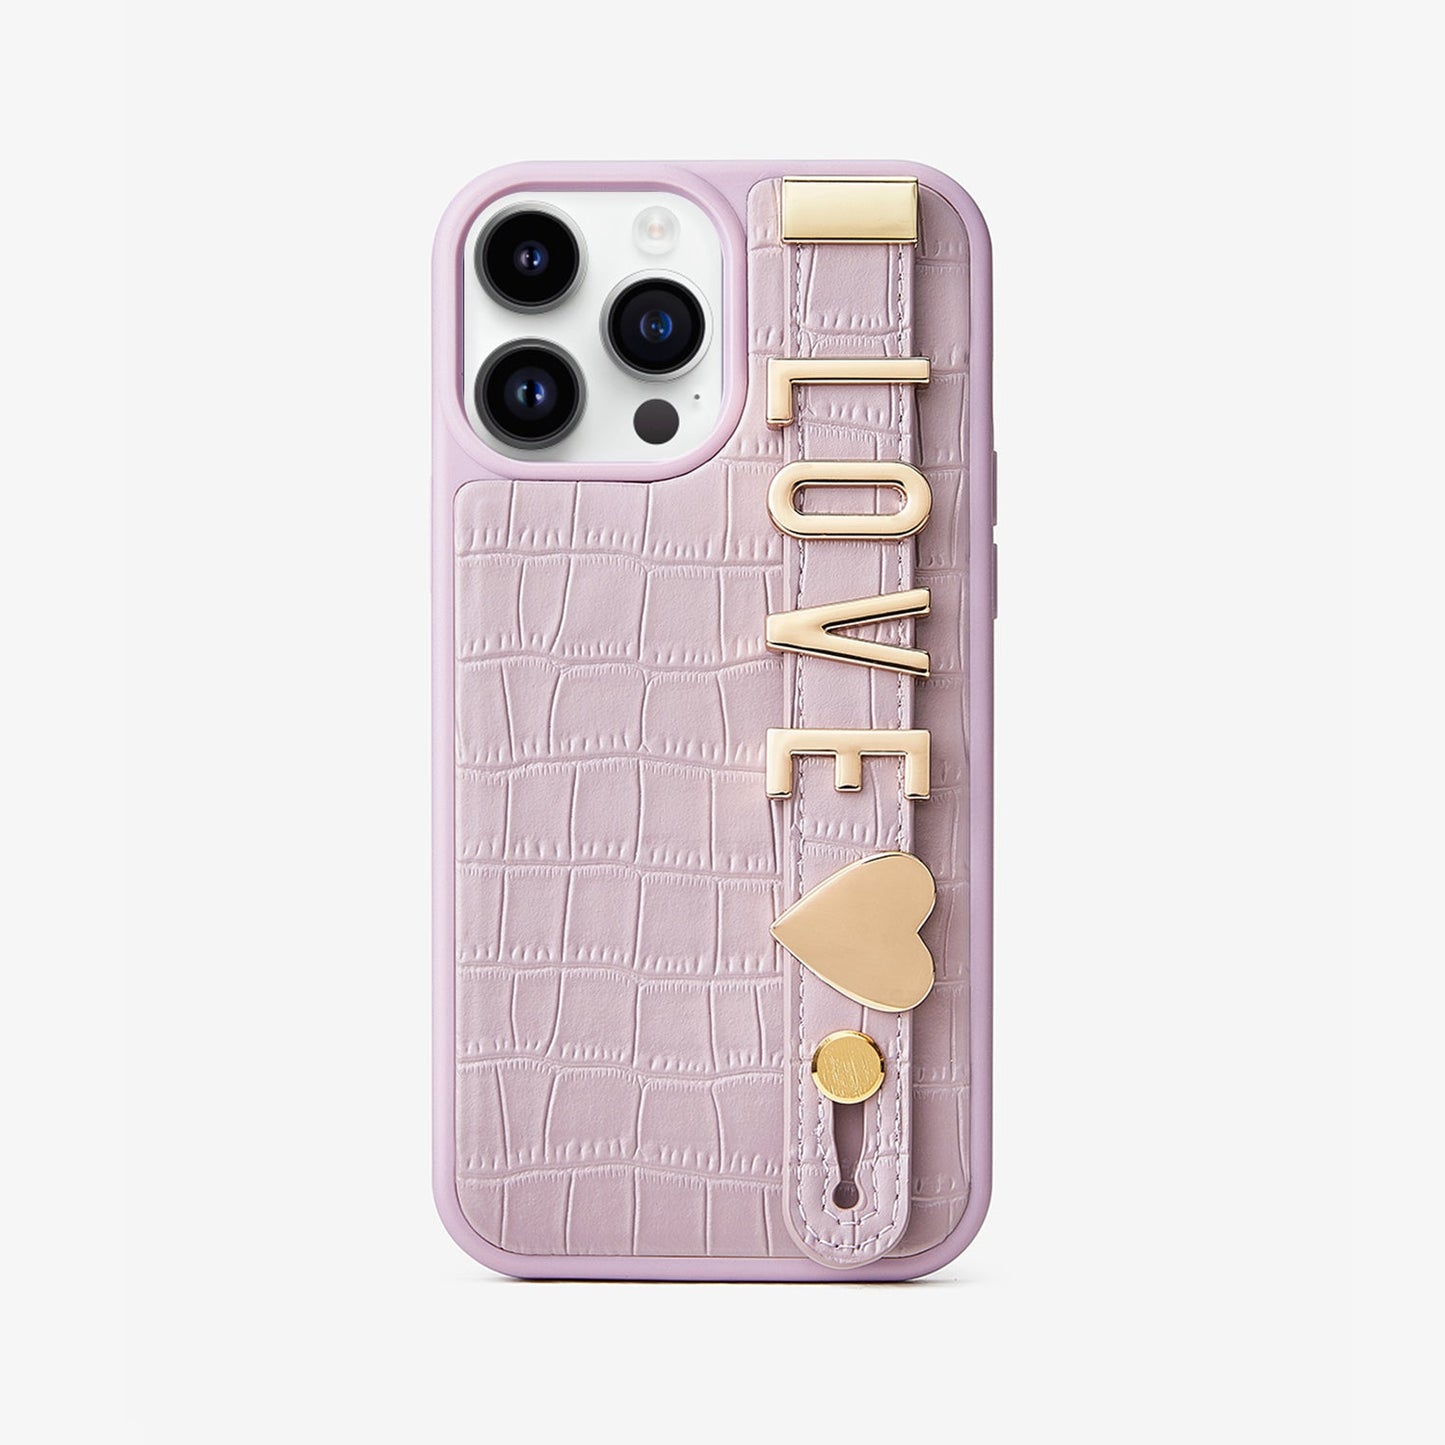 Personal Touch- Customized Alphabet Phone Case